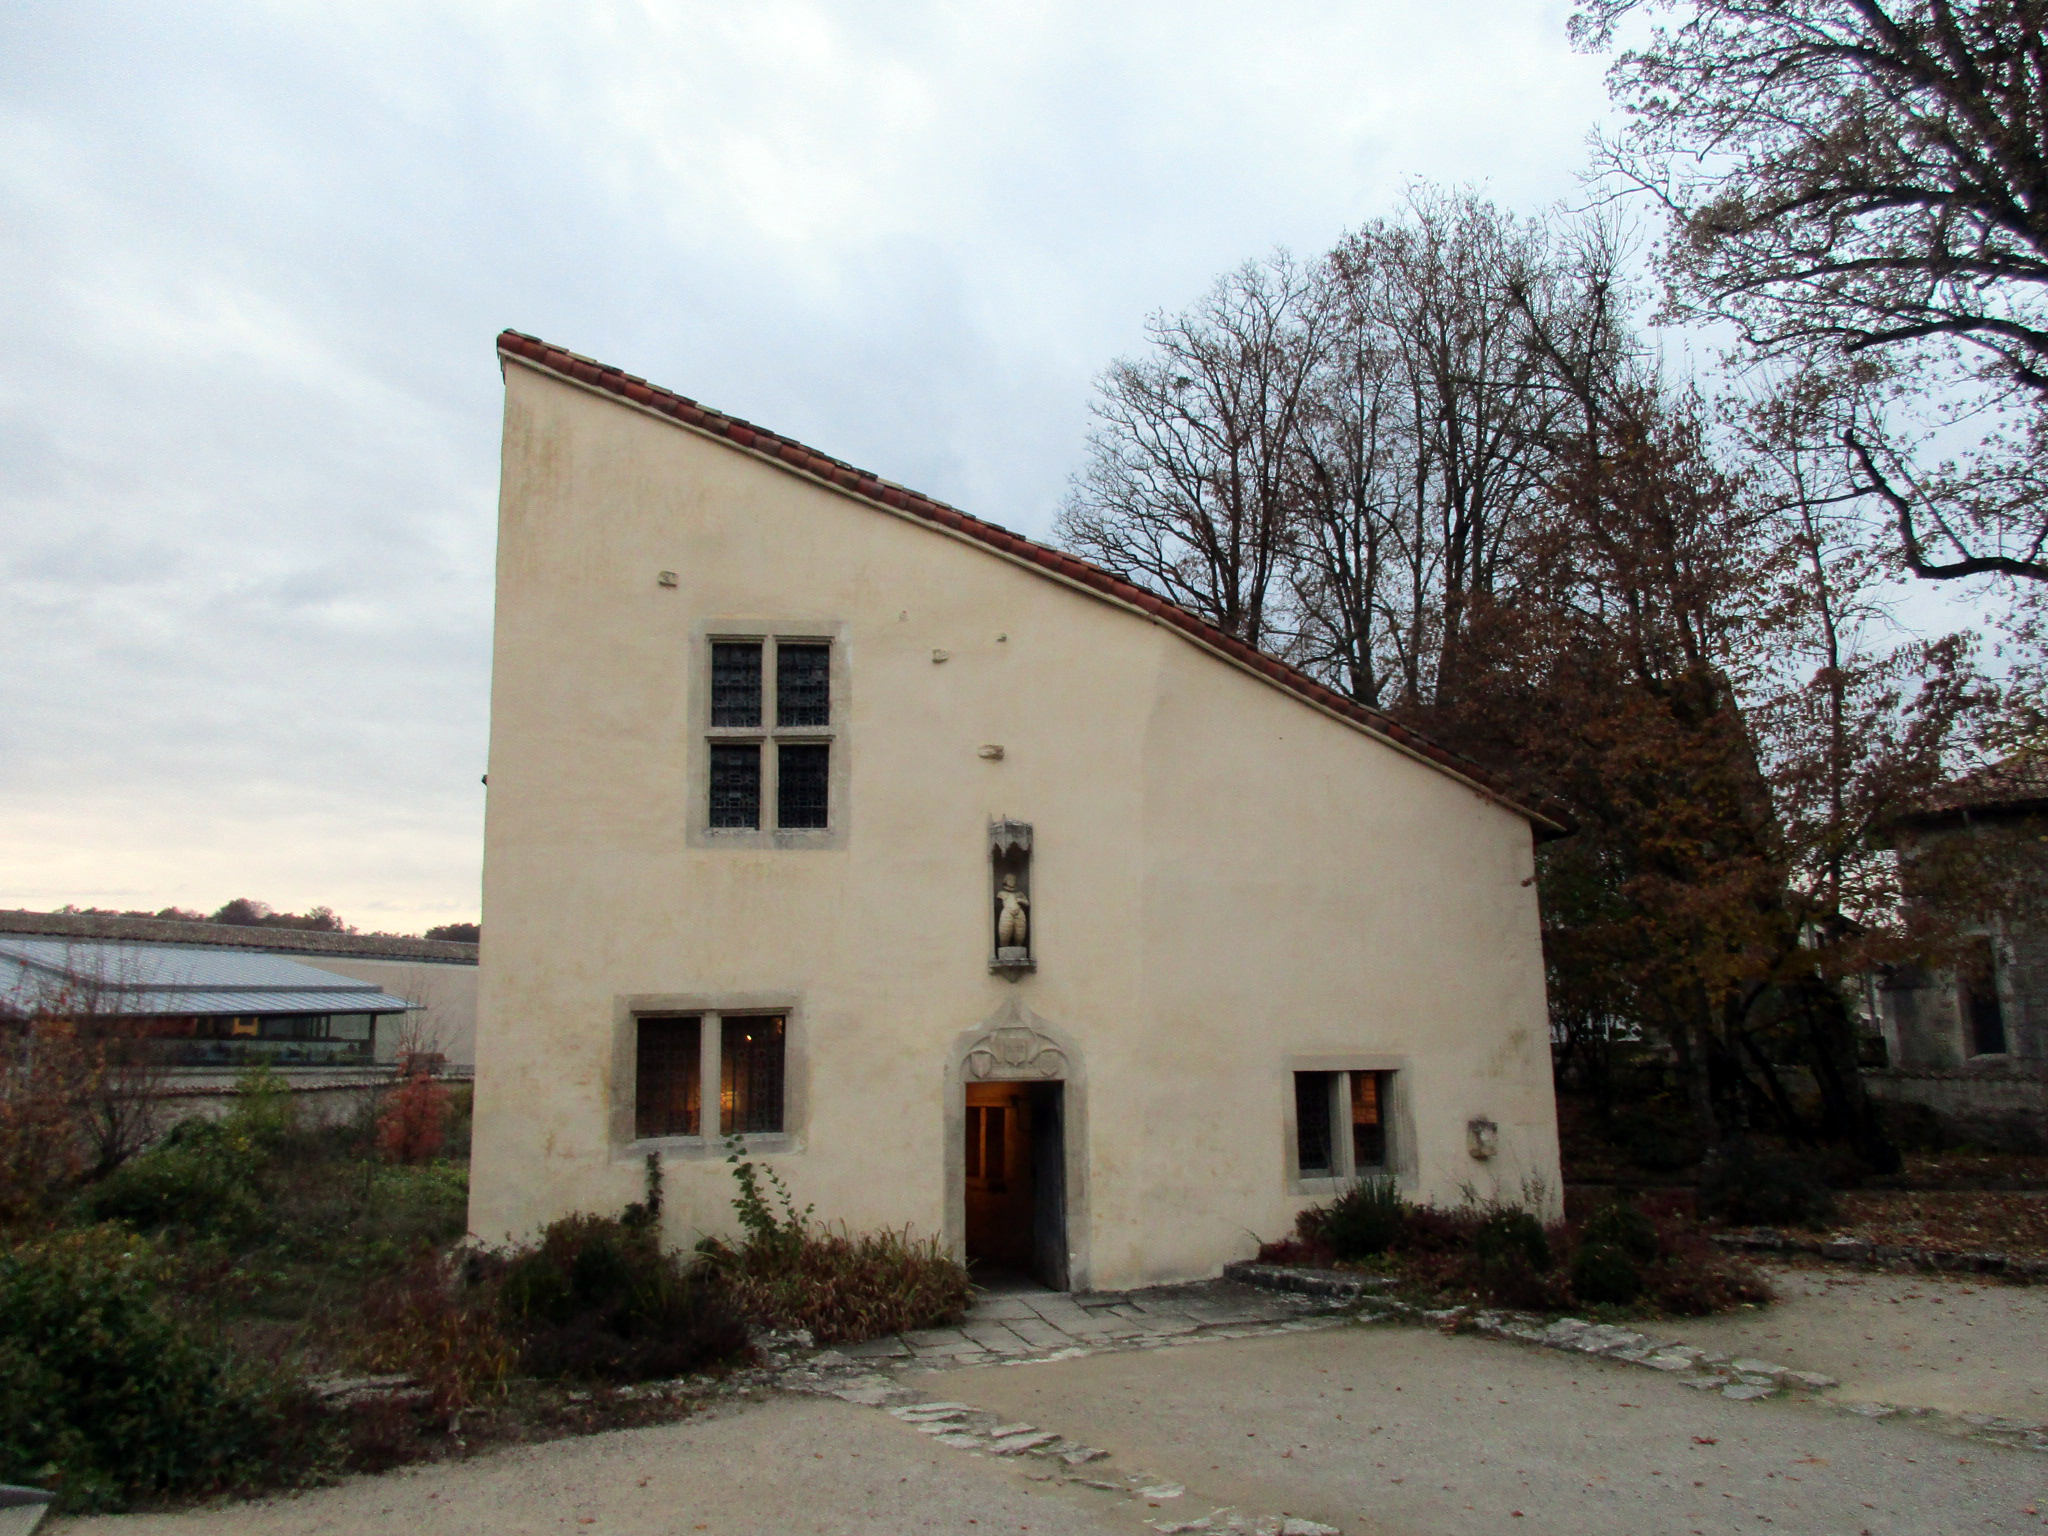 Joan's birthplace in Domrémy is now a museum. The village church where she attended Mass is to the right, behind the trees. Photo taken by <a href=